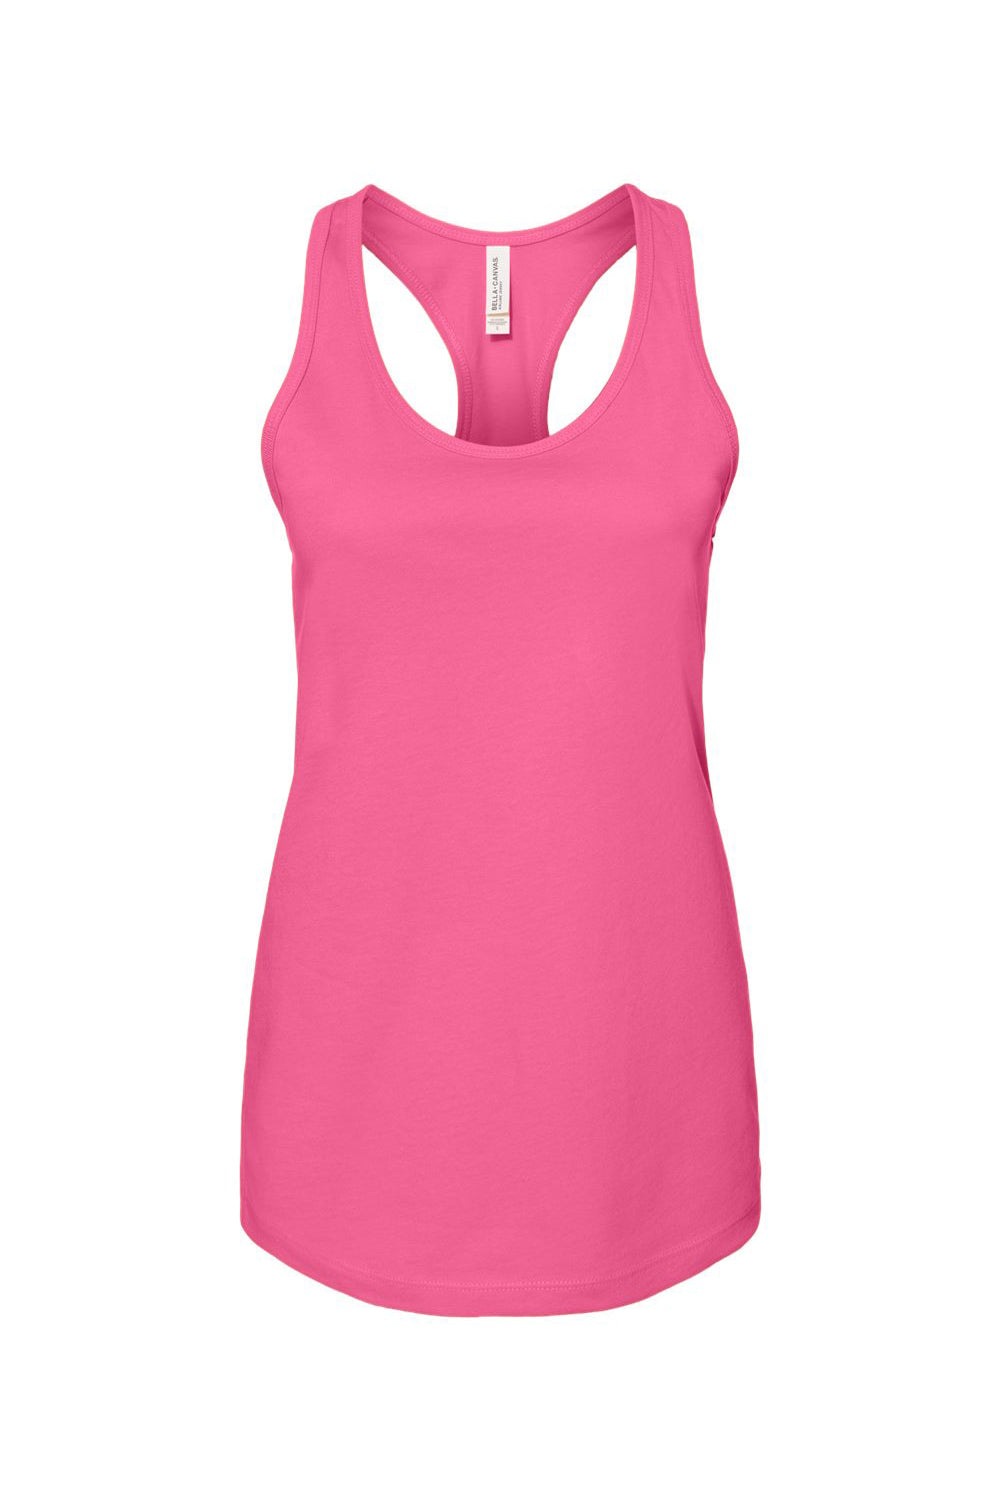 Bella + Canvas BC6008/B6008/6008 Womens Jersey Tank Top Charity Pink Flat Front